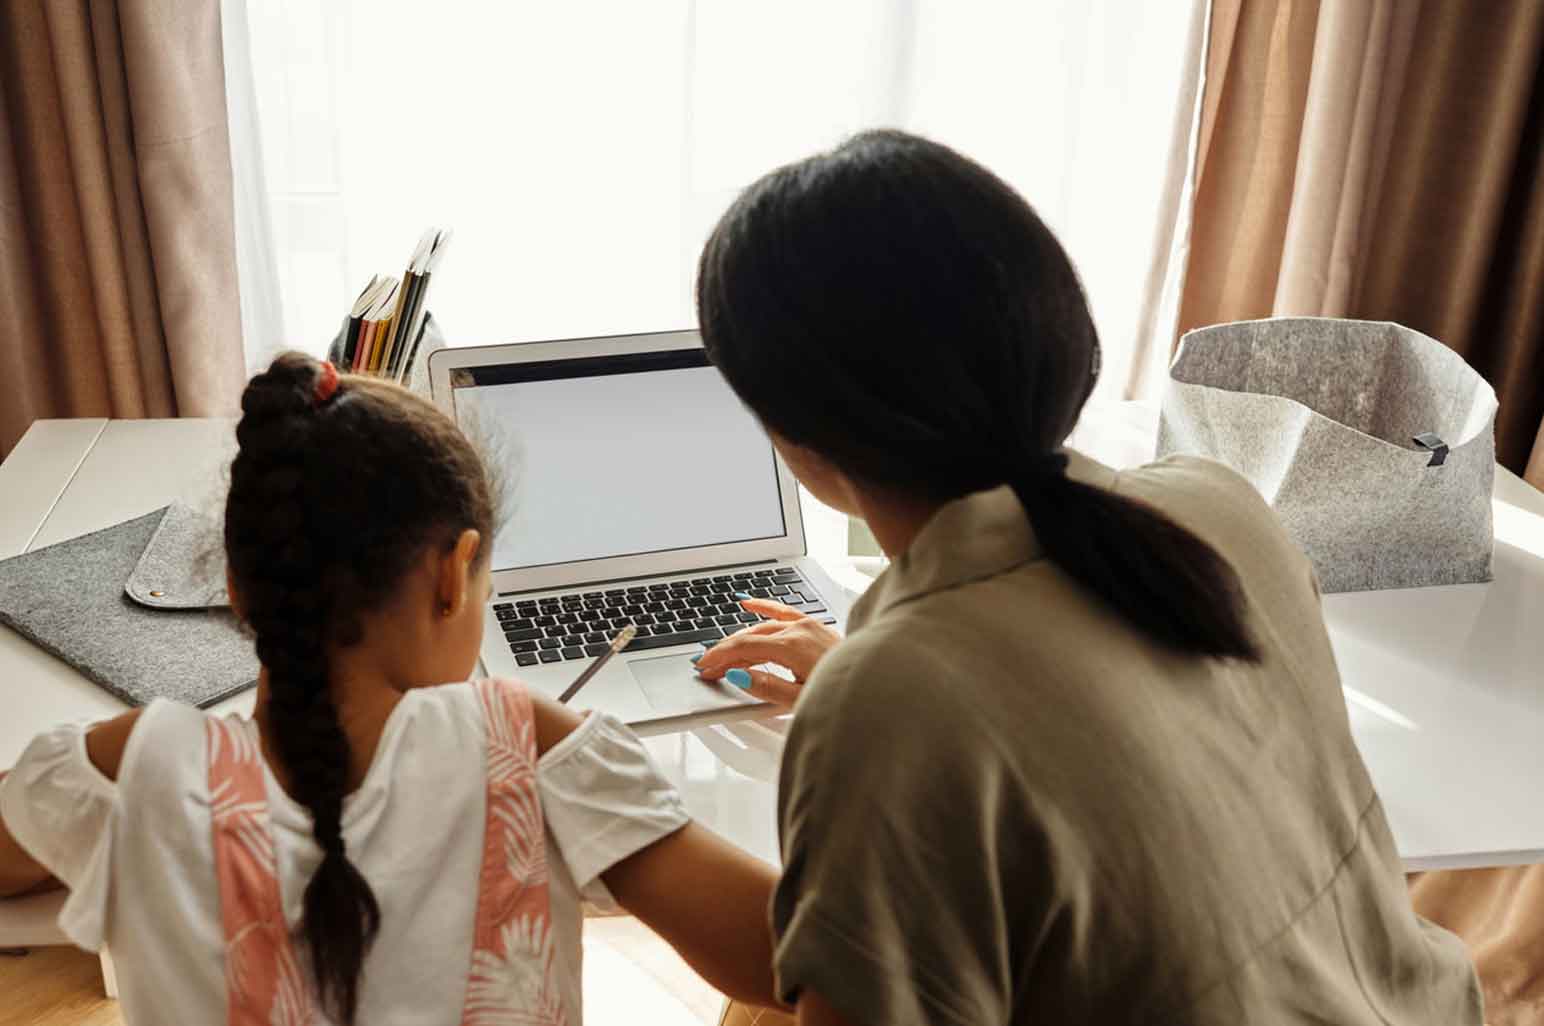 How Can Parents Prevent Their Kids From Cheating During Online Exams?